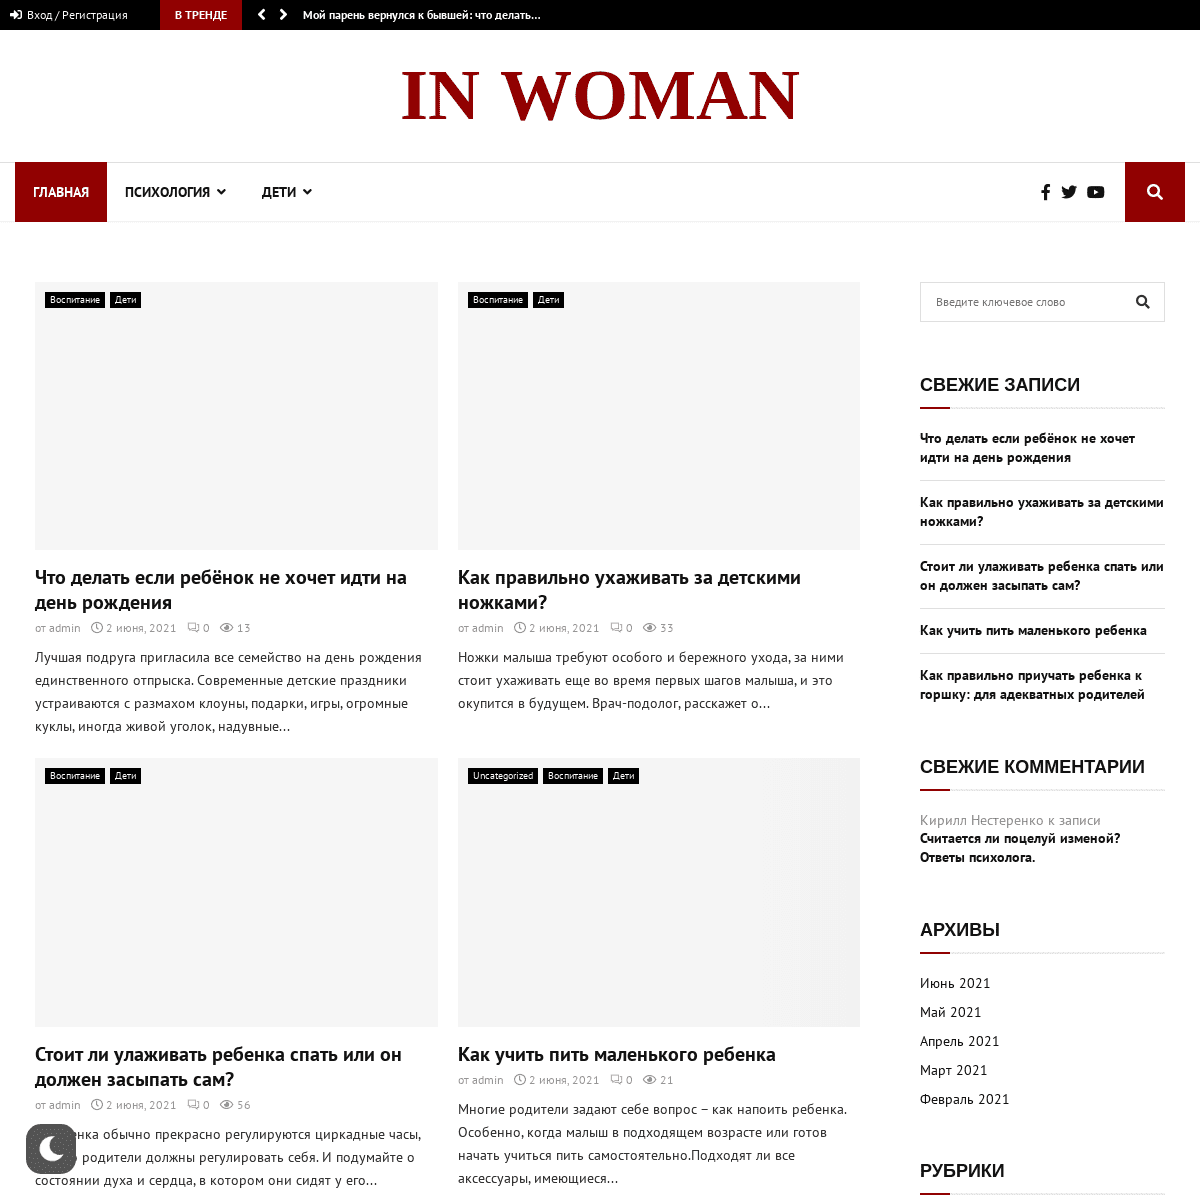 A complete backup of https://in-woman.ru